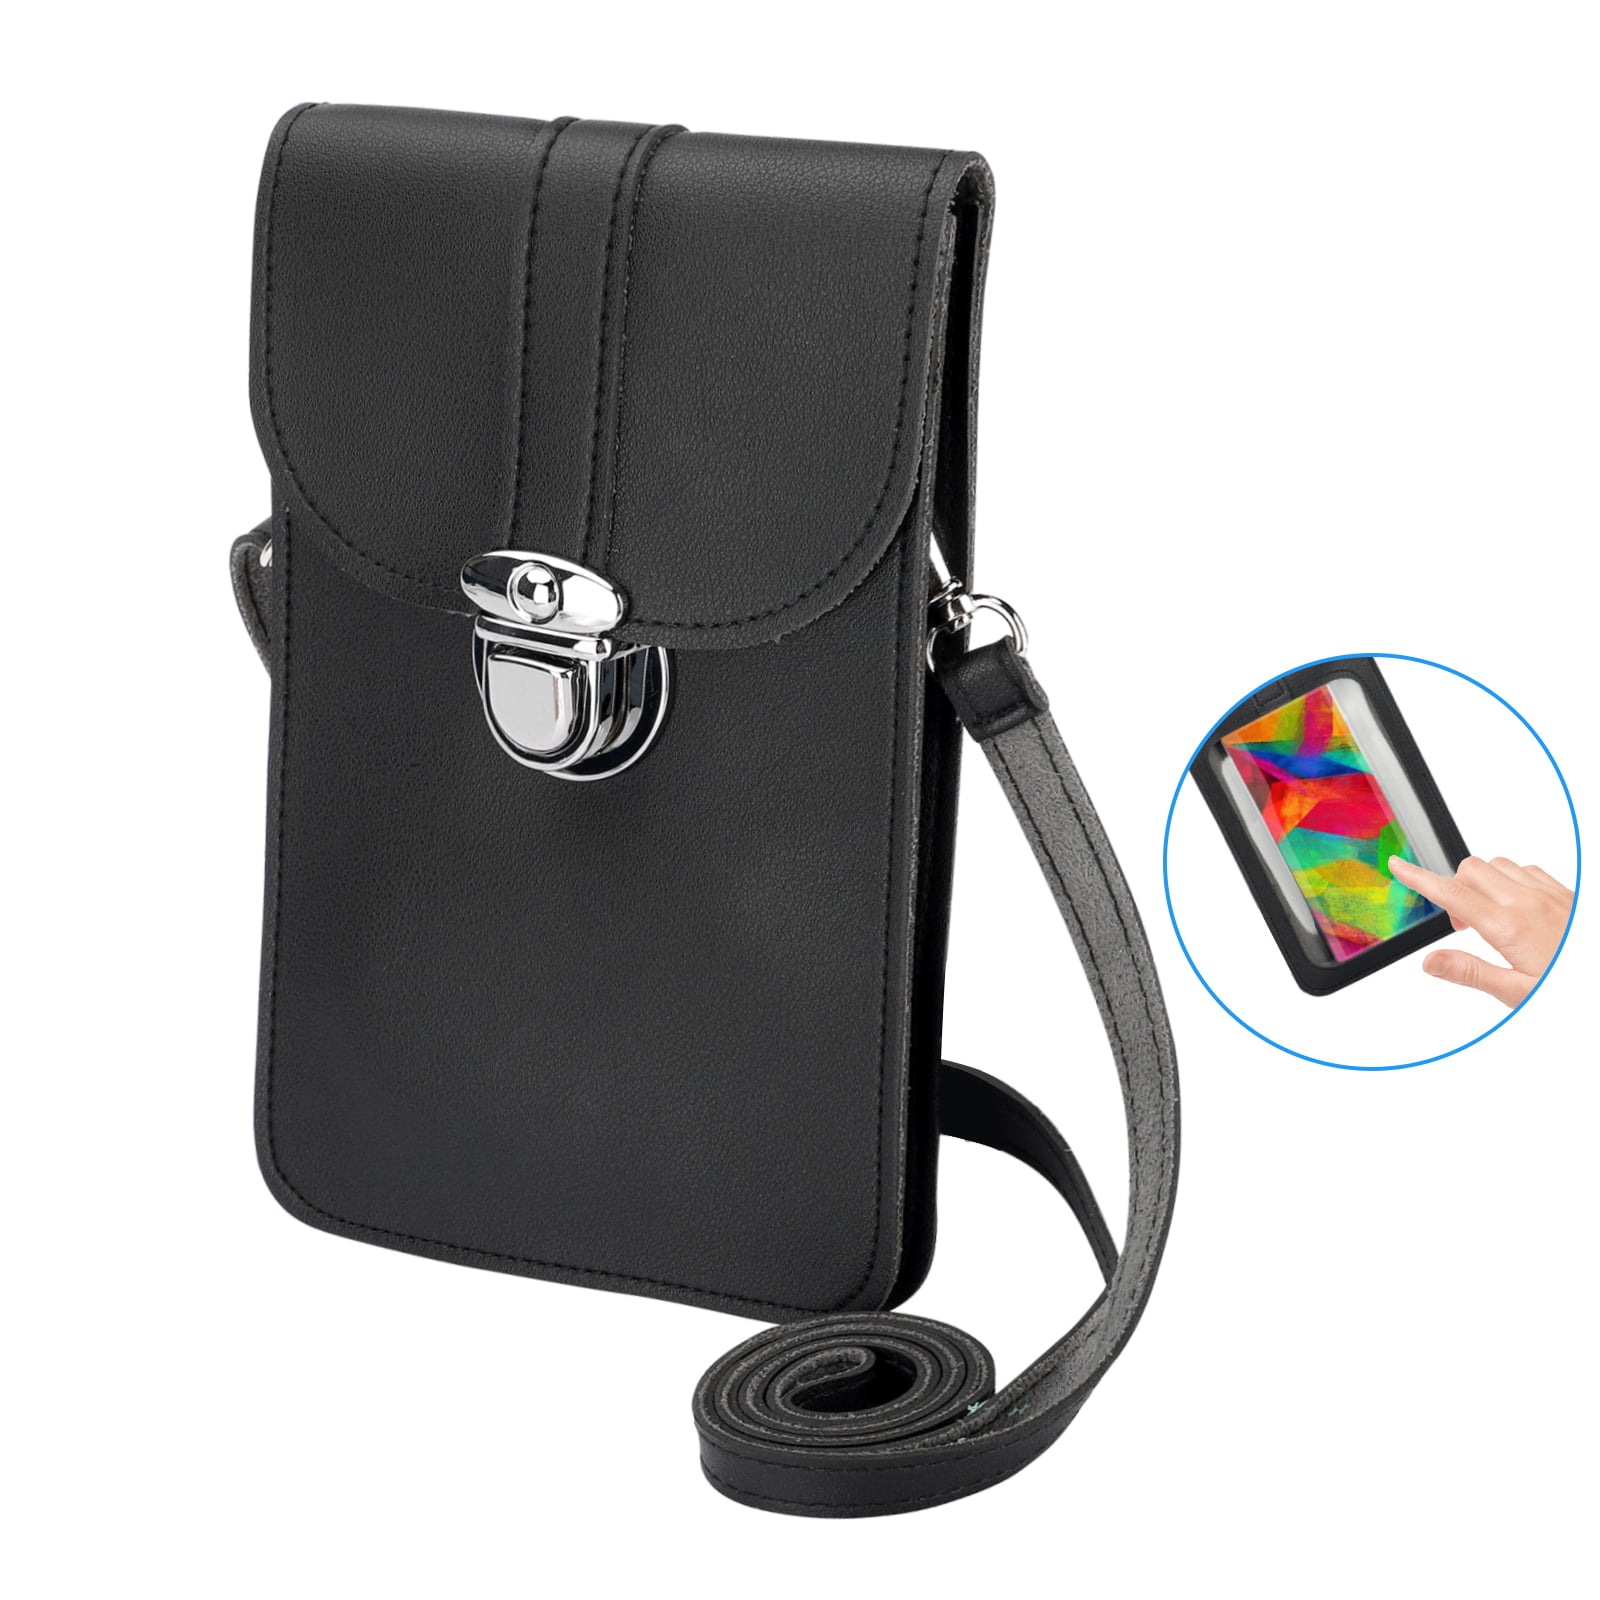 Cell Phone Bag, PU Leather Crossbody Cellphone Purse for Women, Touch Screen Cell Phone Pouch ...